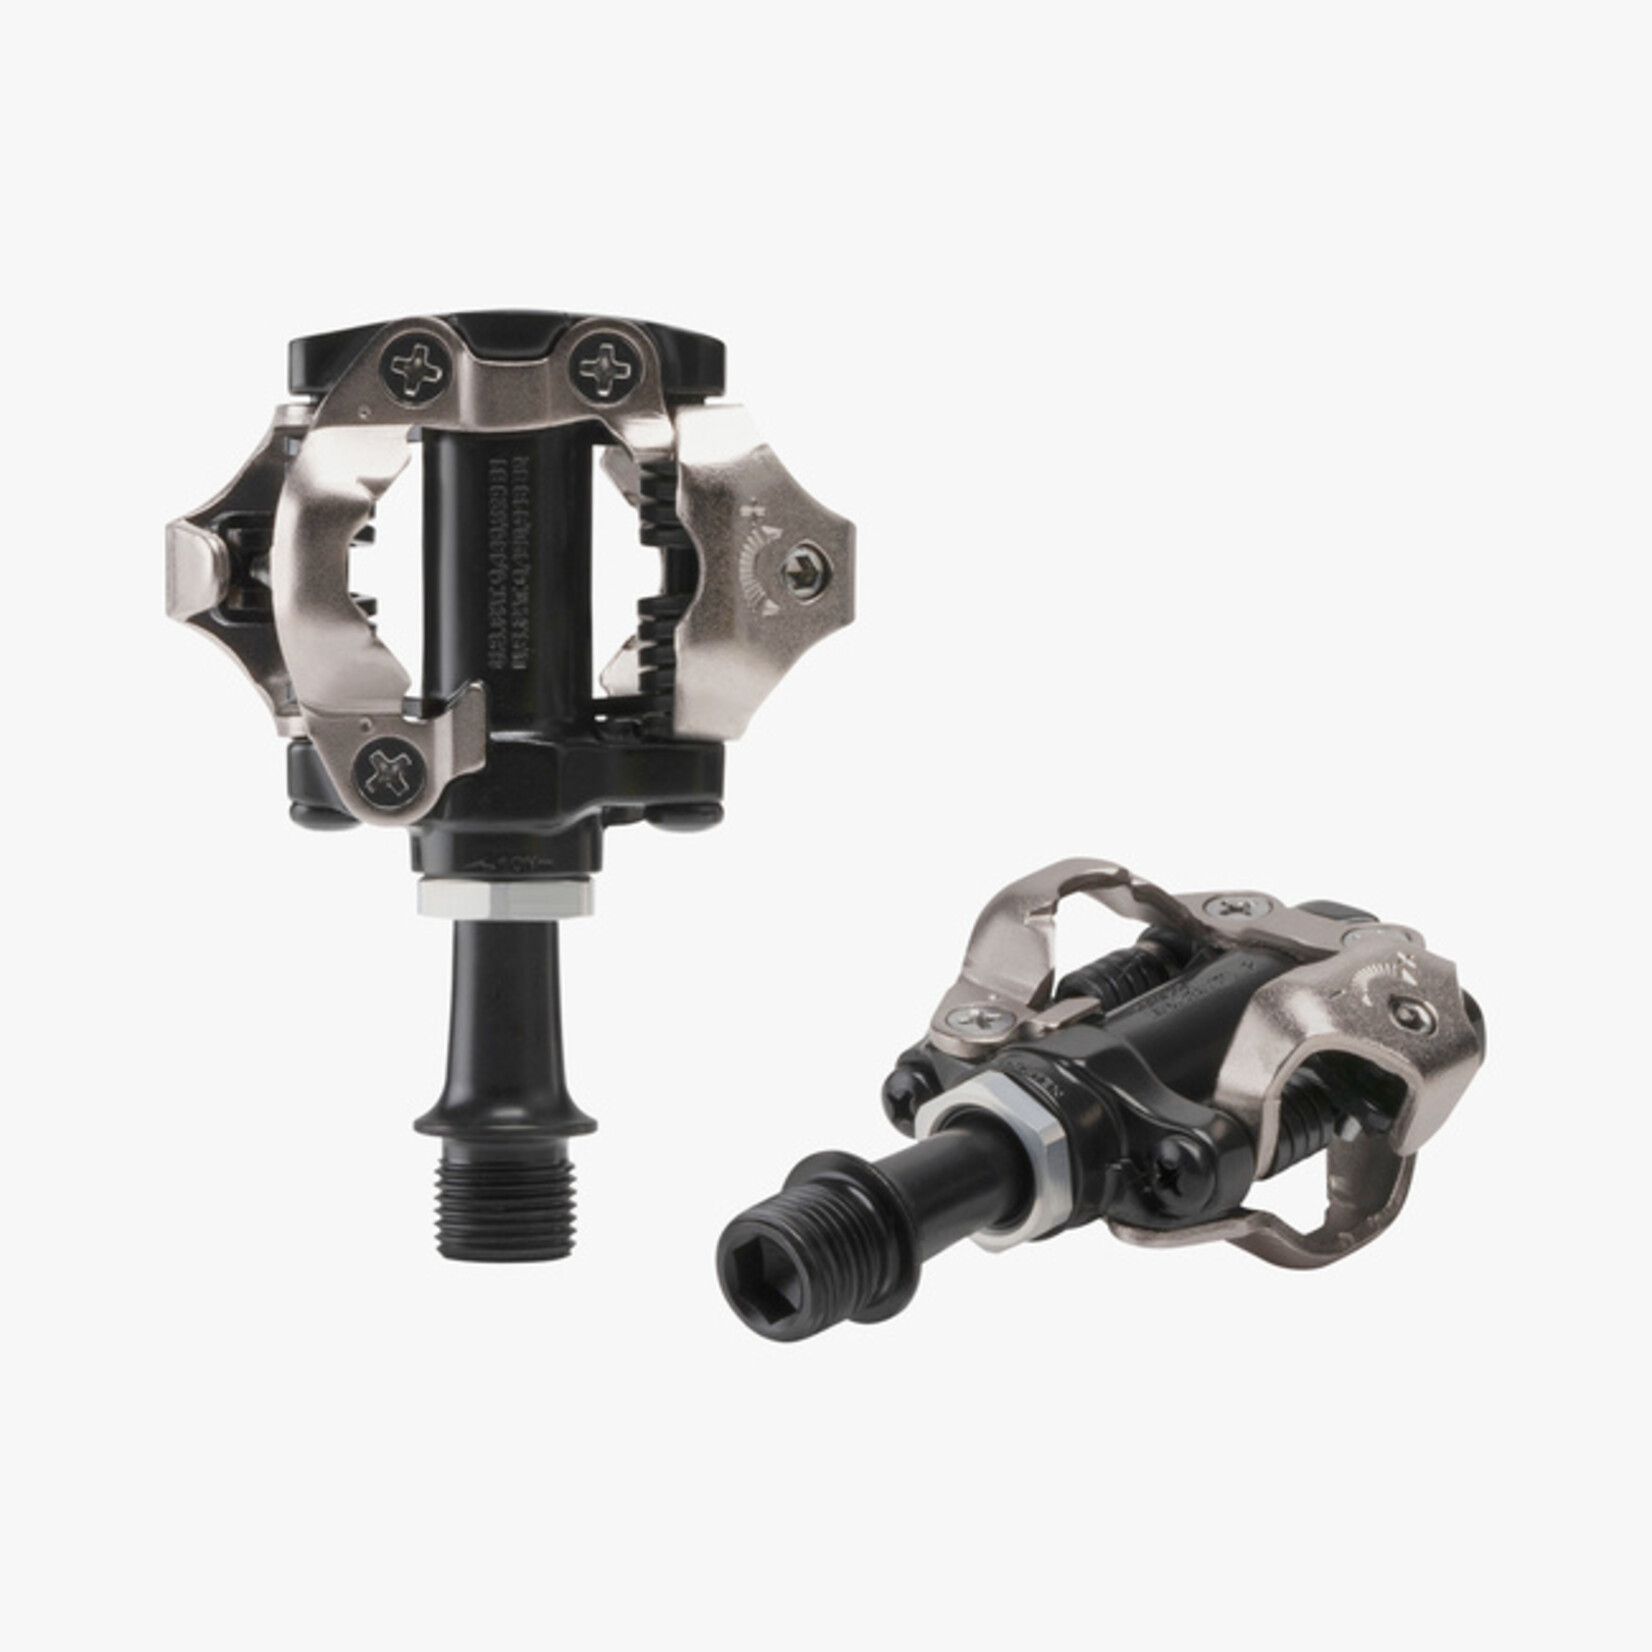 Shimano PD-M540 Pedals with Cleat (SM-SH51)